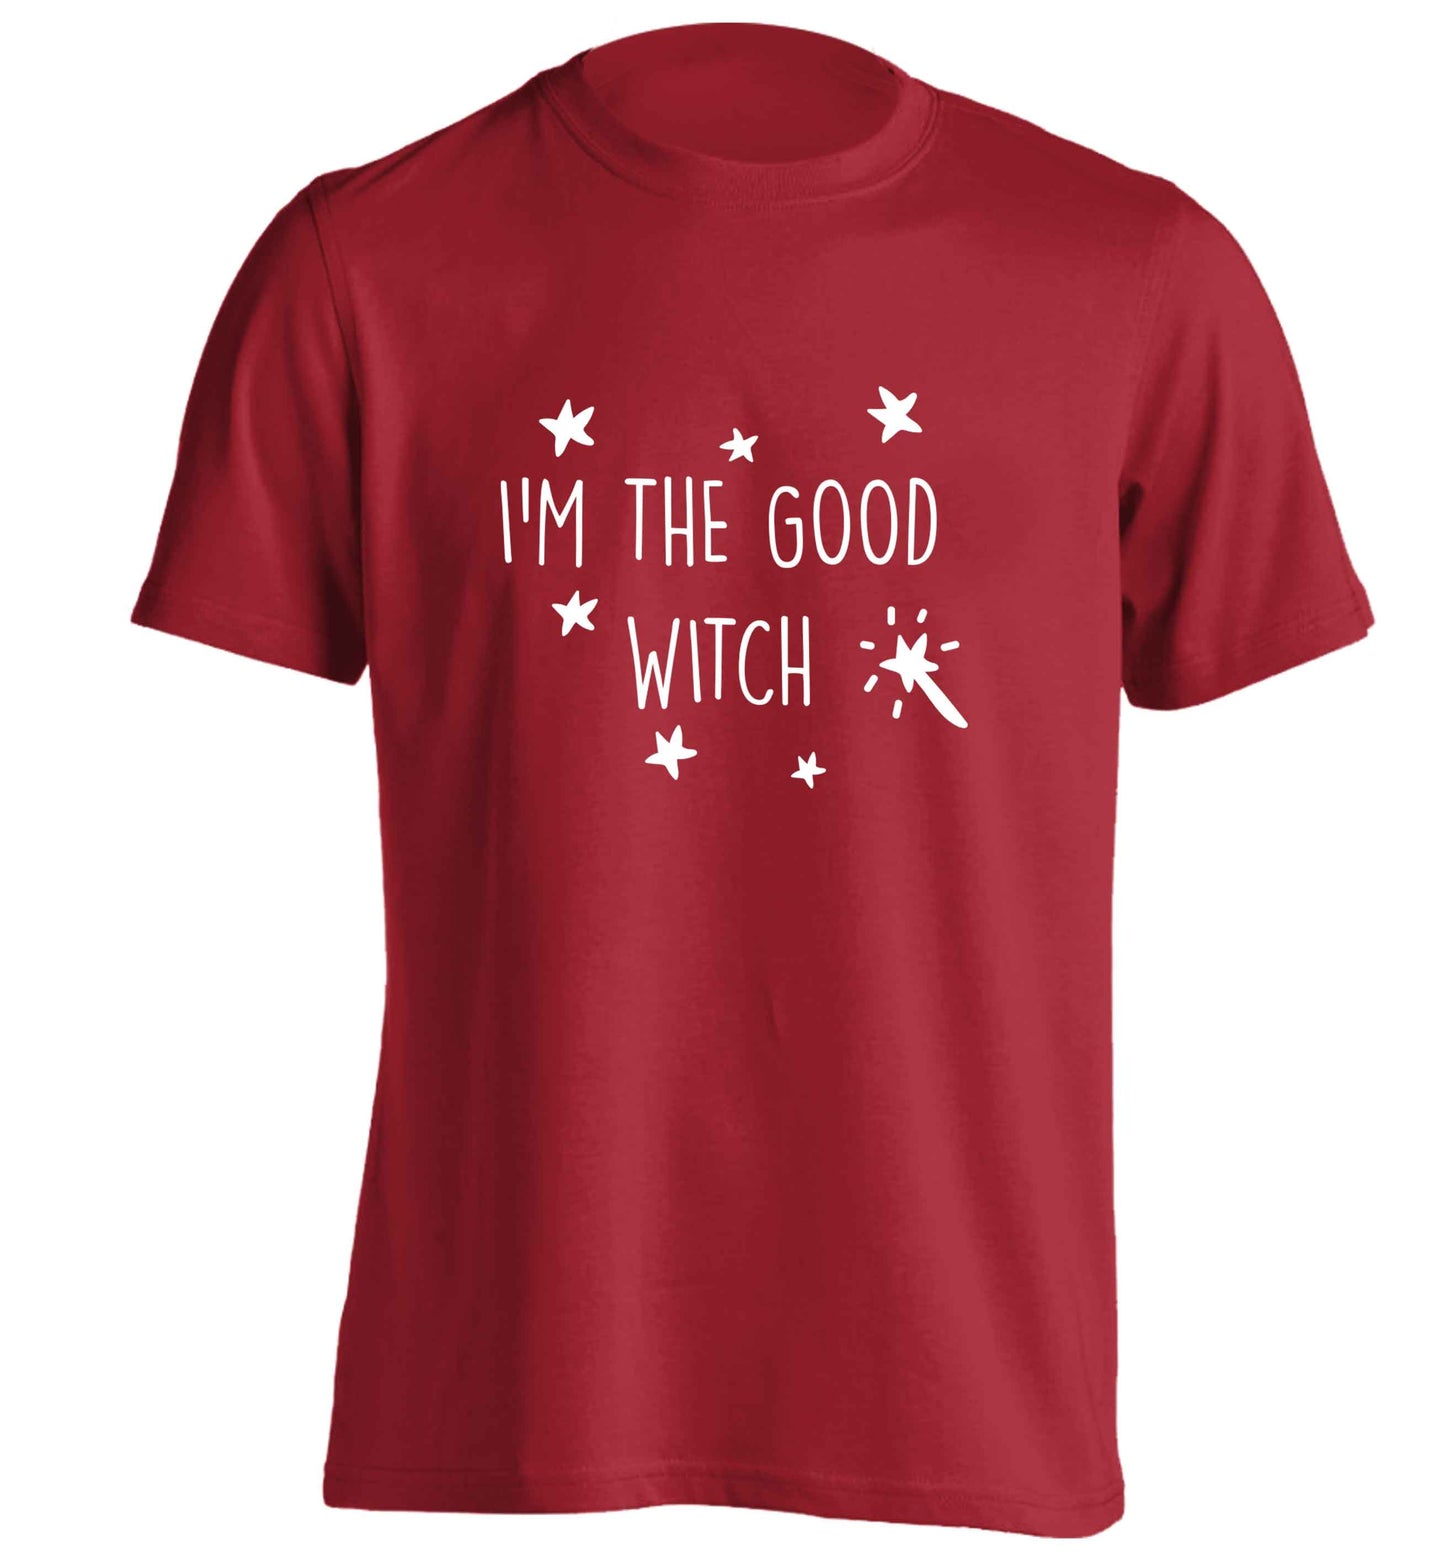 Good witch adults unisex red Tshirt 2XL